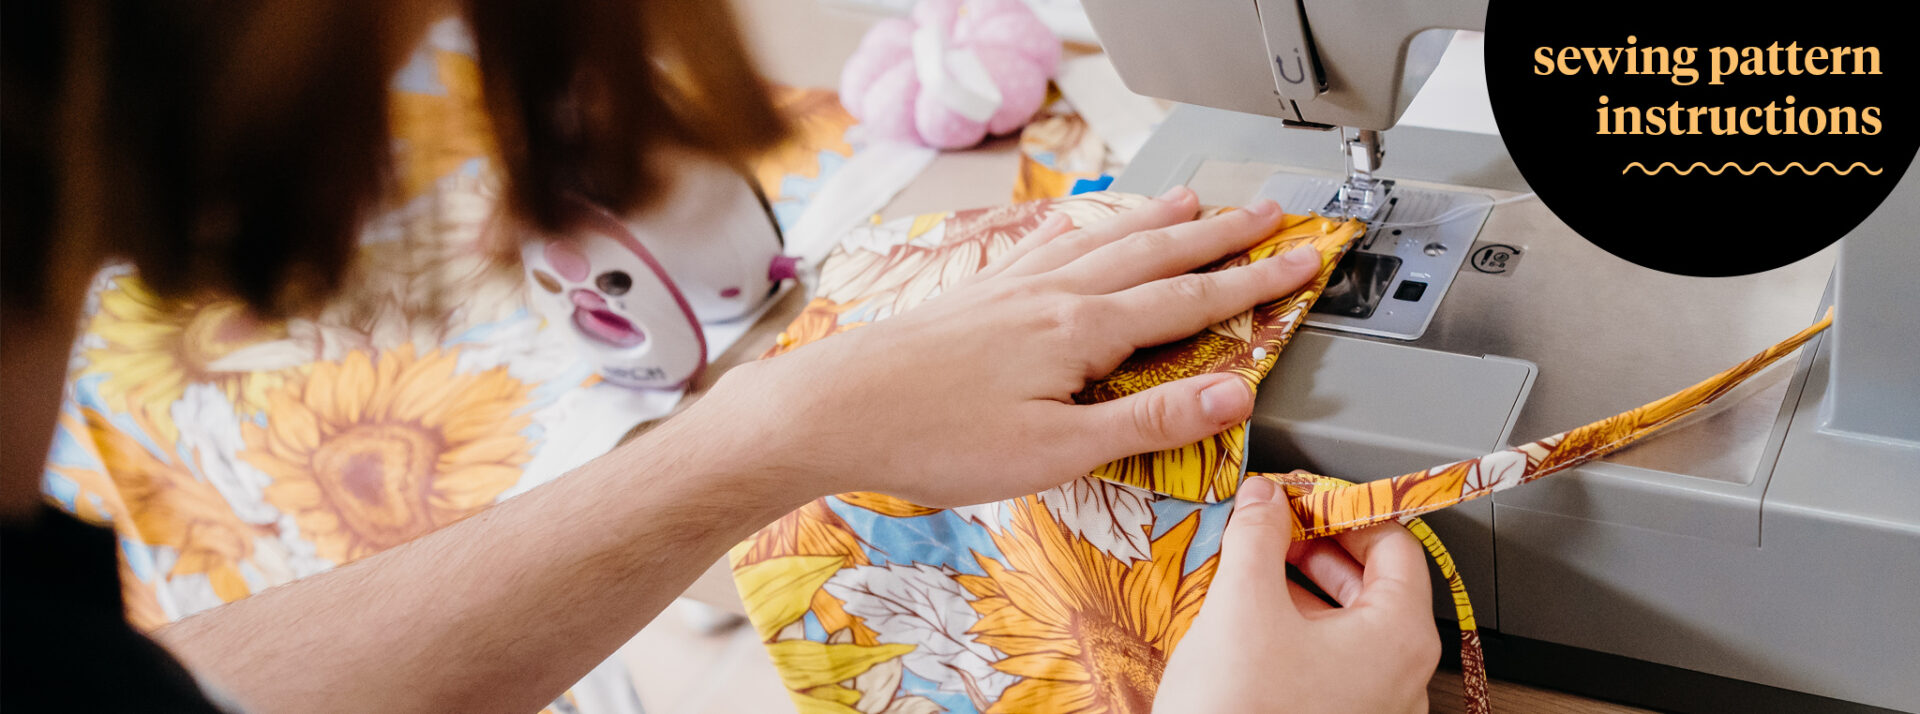 Want to Learn to Sew? Here's How to Get Started in Style - peppermint  magazine